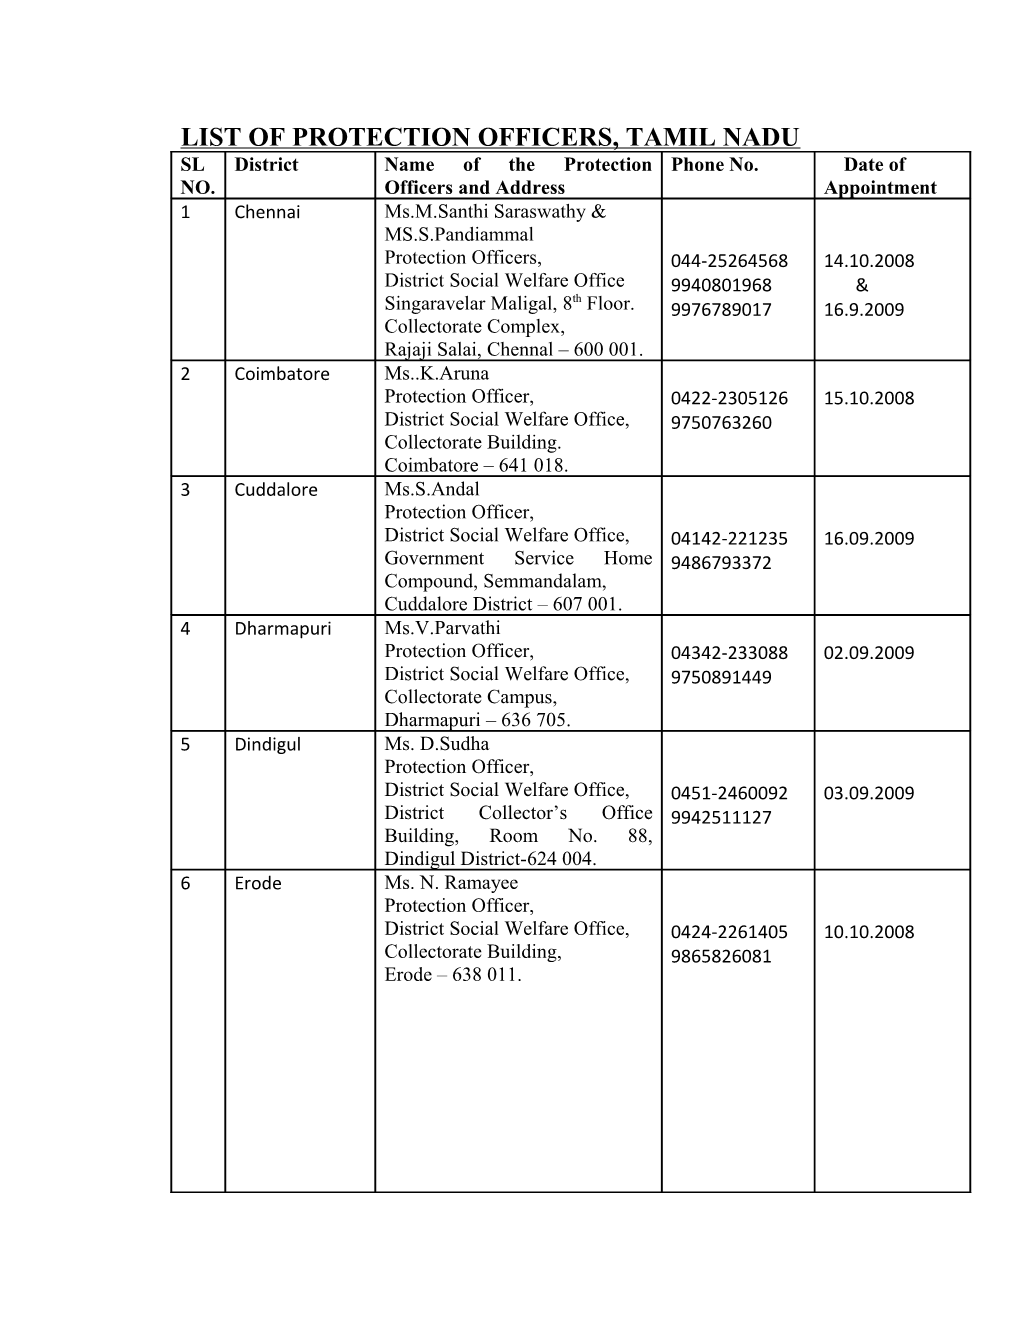 List of Protection Officers, Tamil Nadu